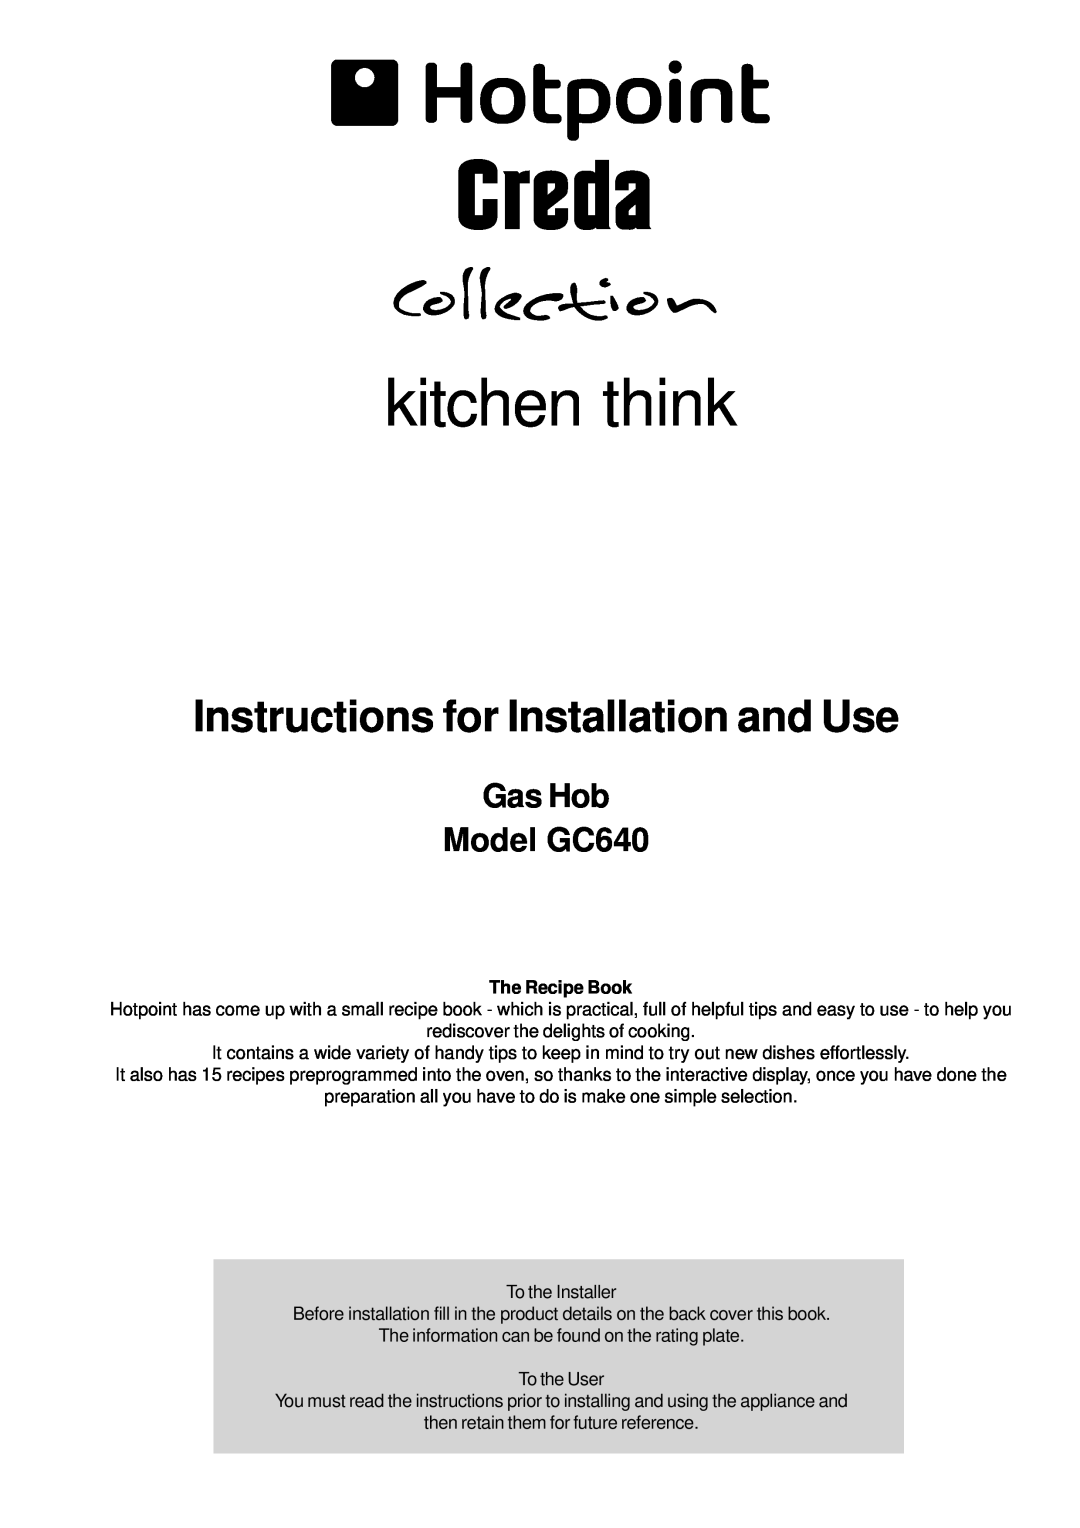 Hotpoint manual Gas Hob Model GC640, kitchen think, Instructions for Installation and Use, The Recipe Book 